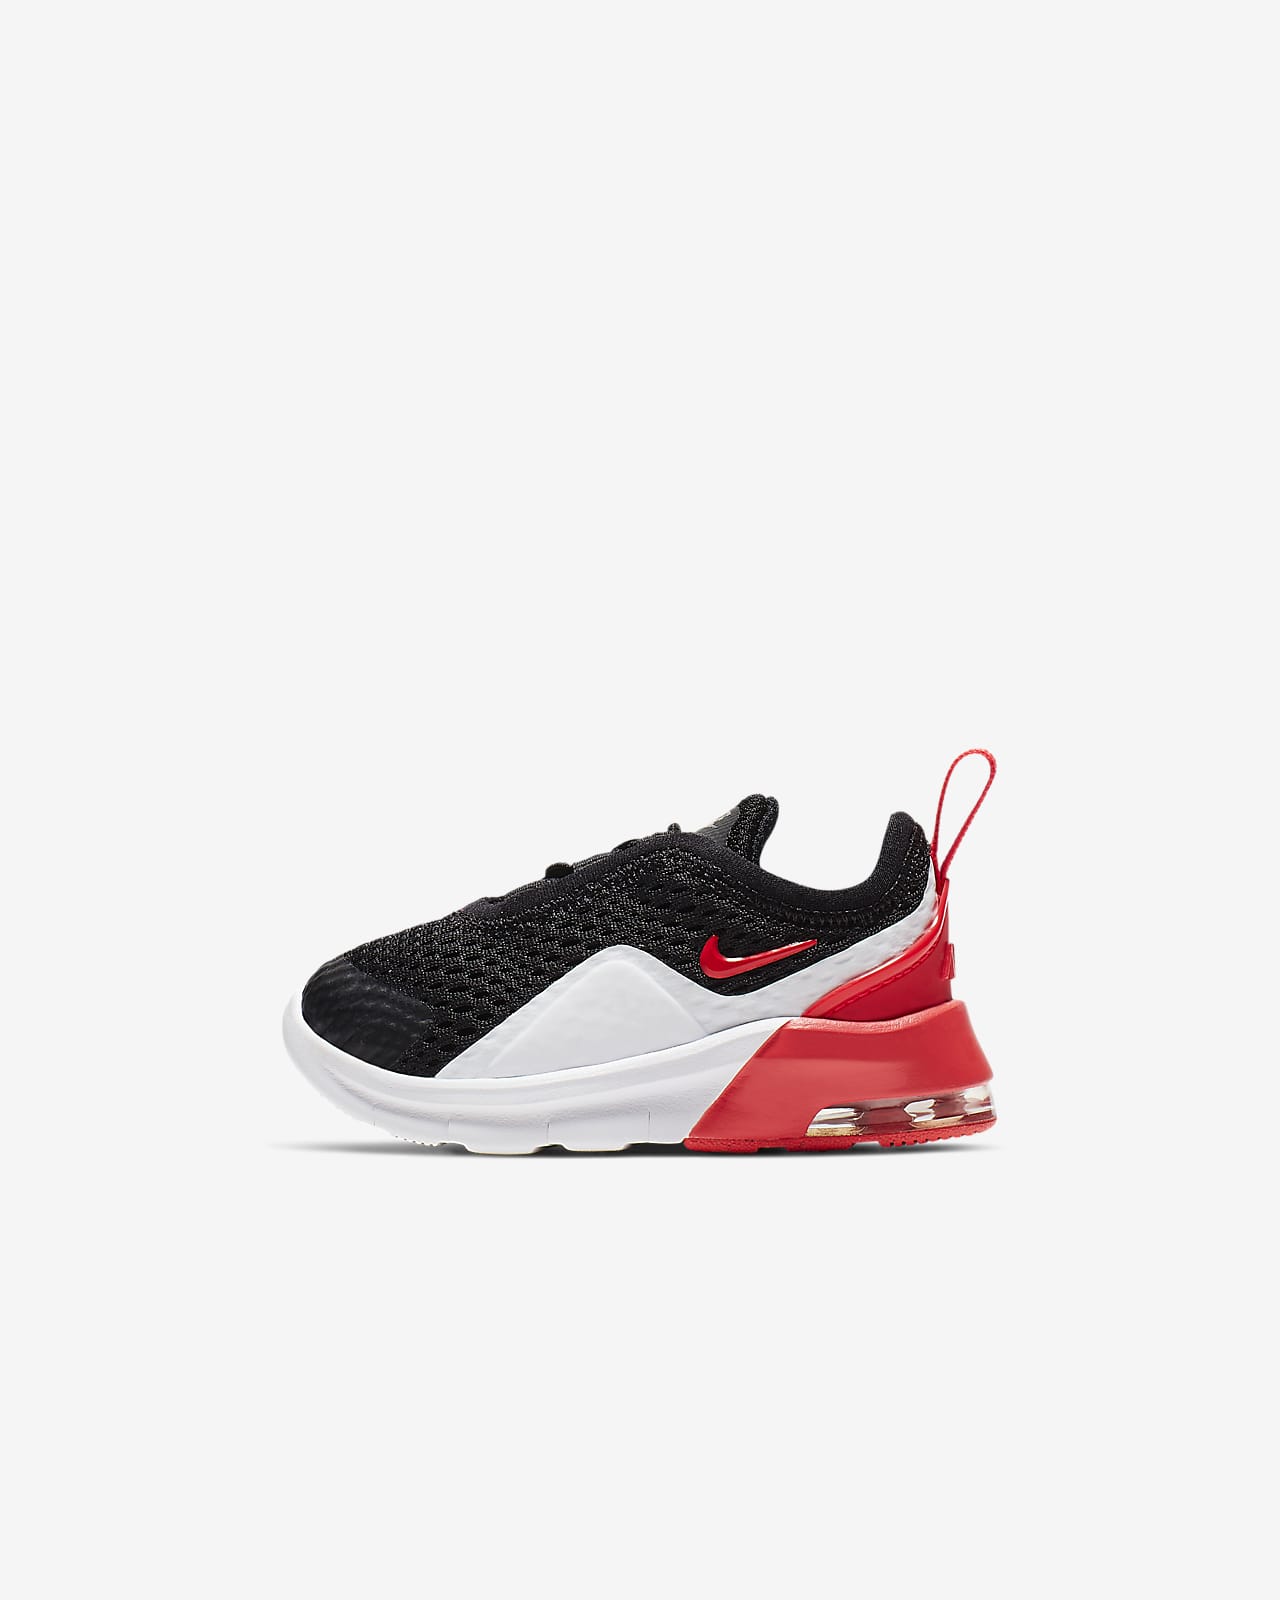 red and black air max toddler